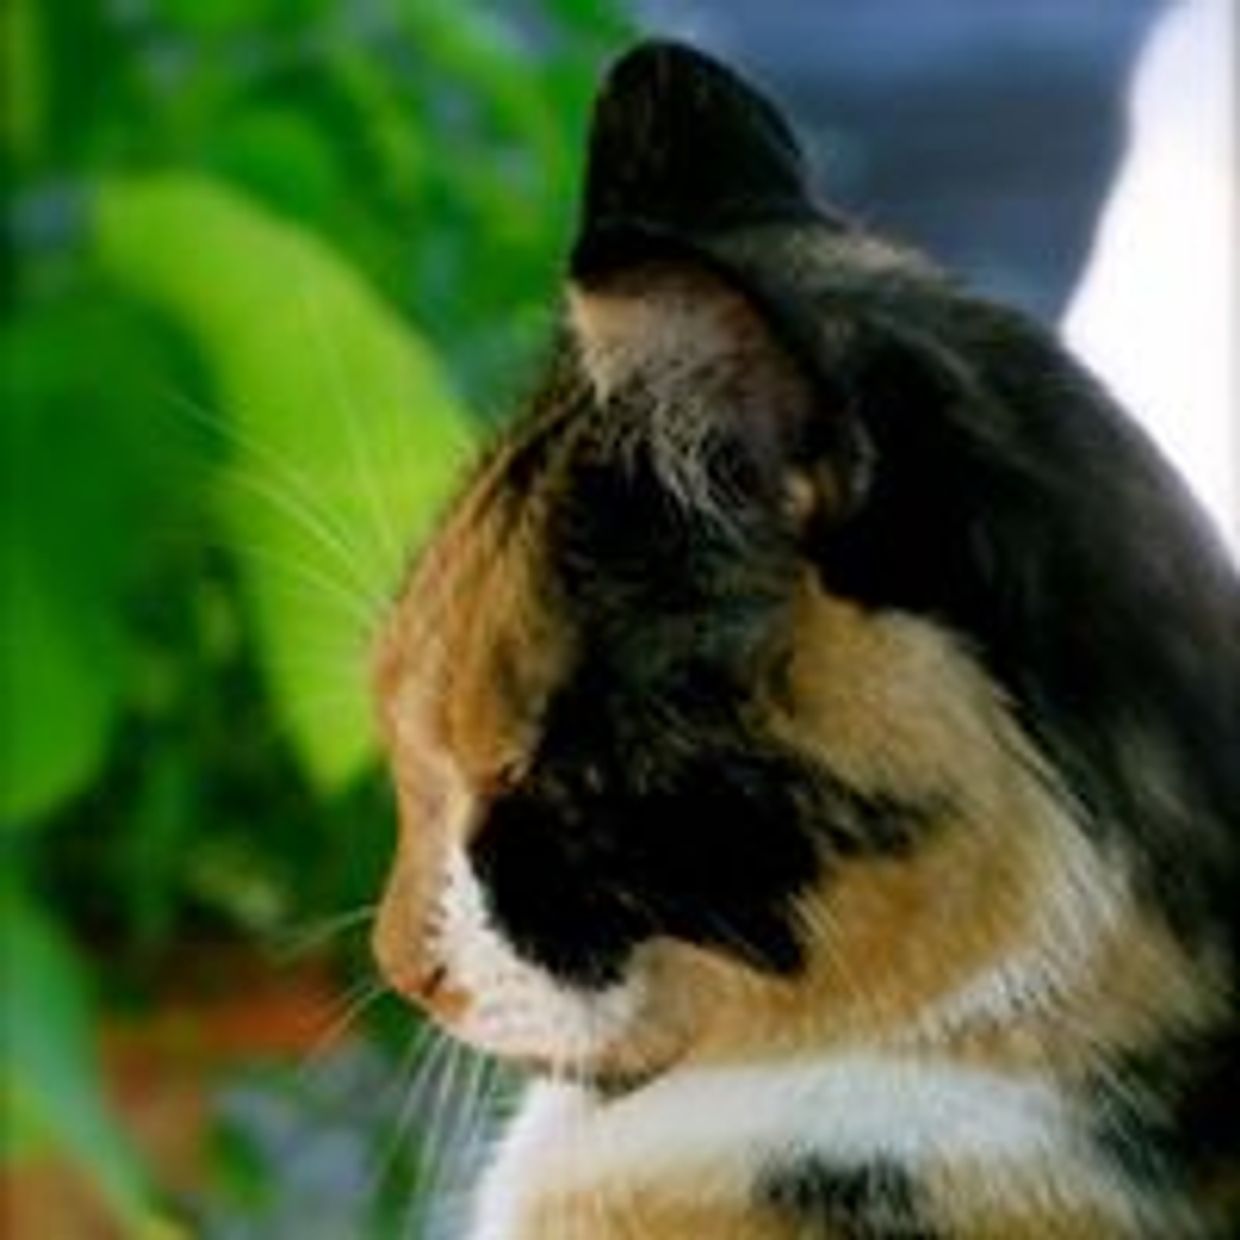 A cat with orange and black streaks